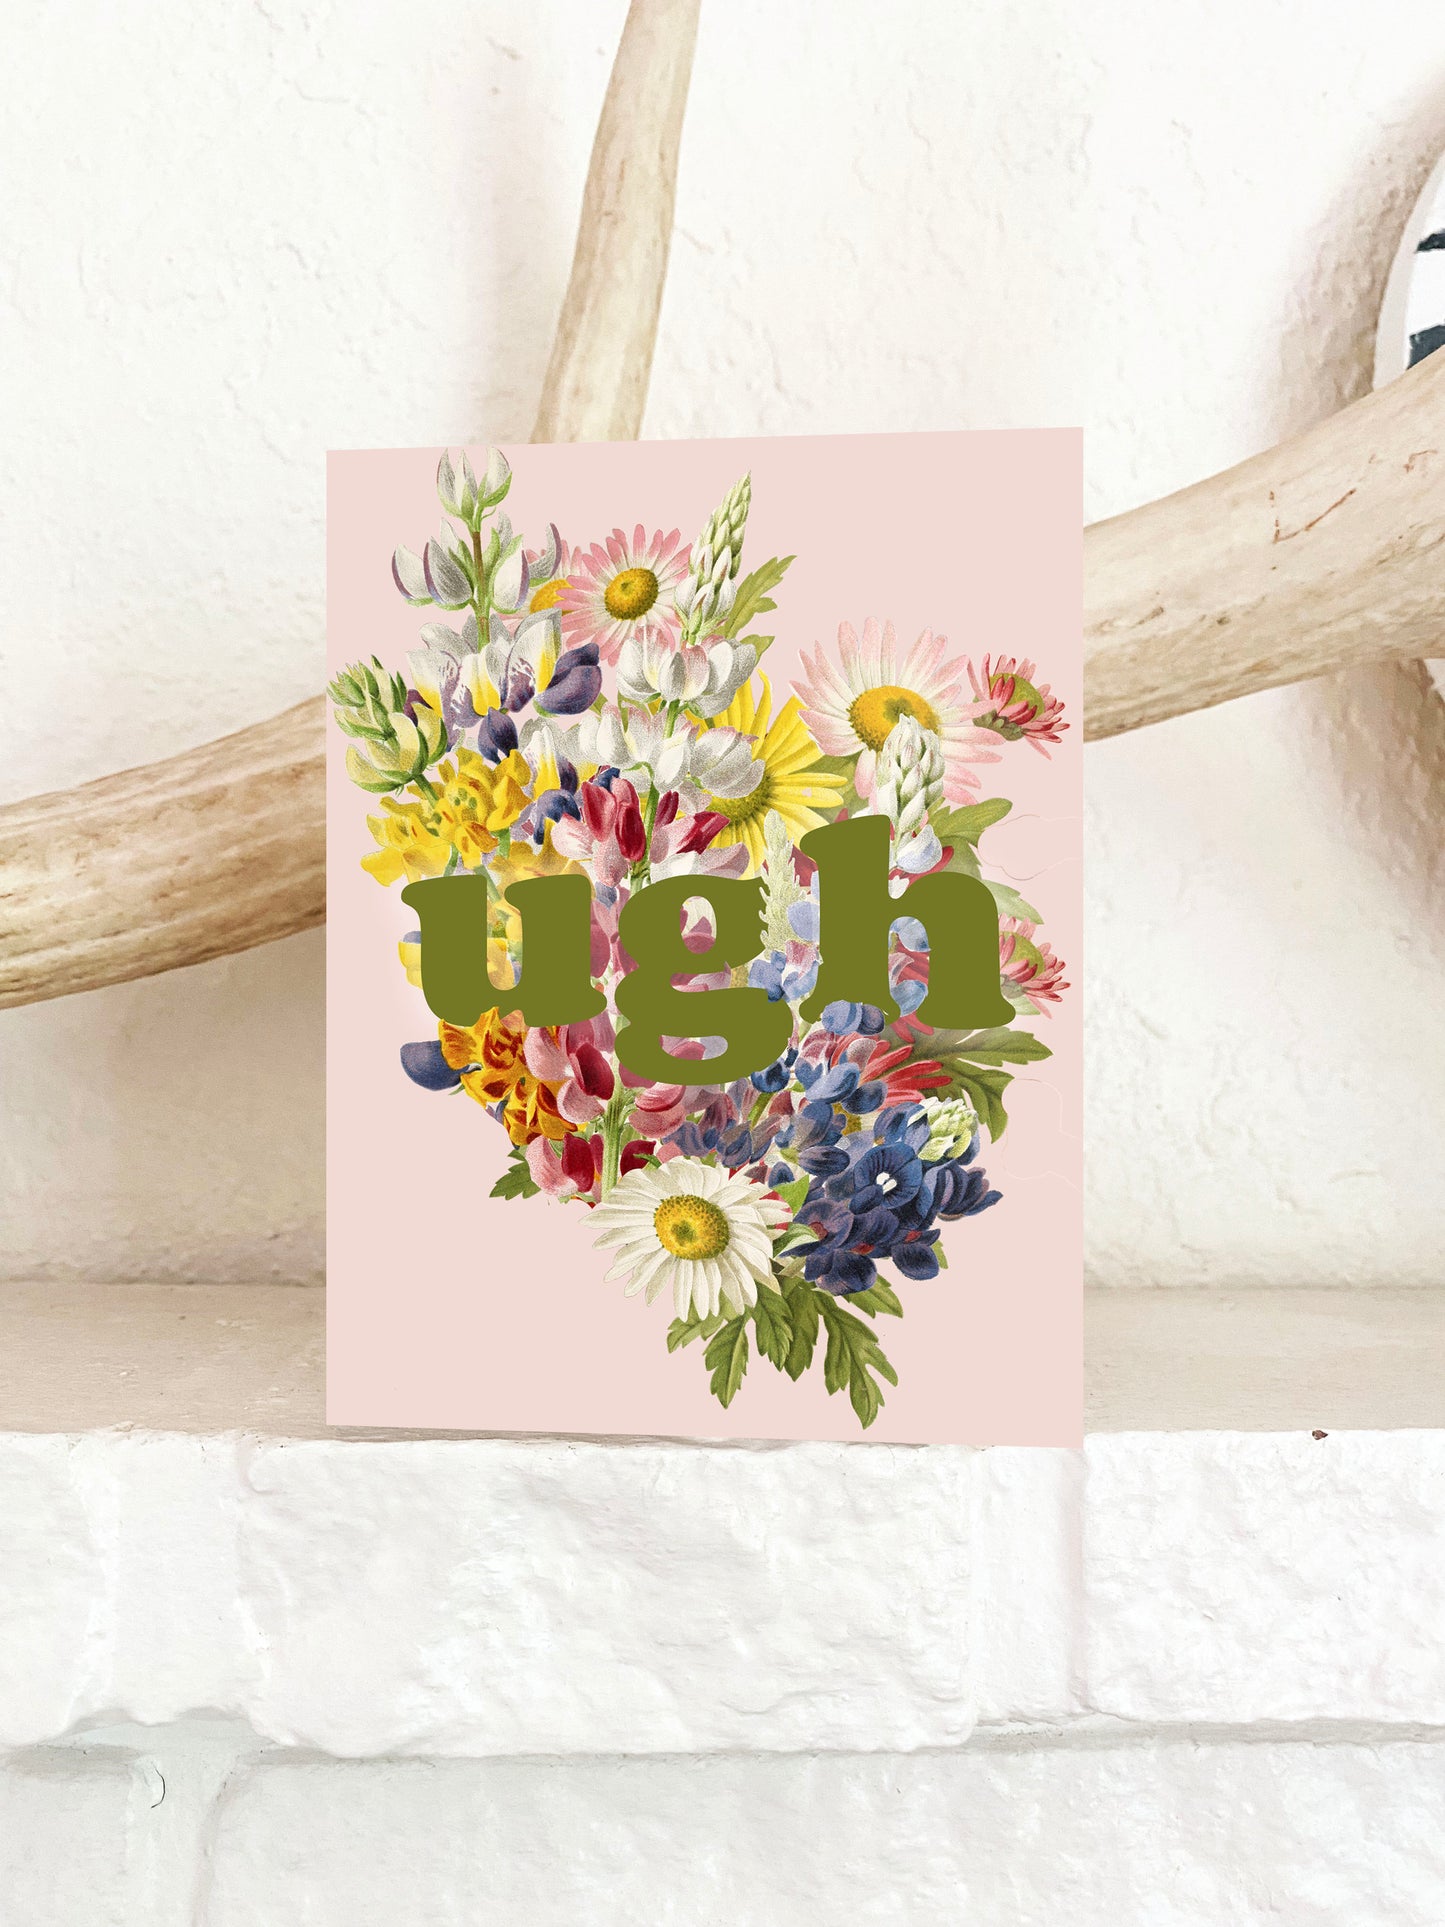 funny greeting card Ugh pink card with flowers for sympathy or a hard day relatable greeting cards coin laundry montana